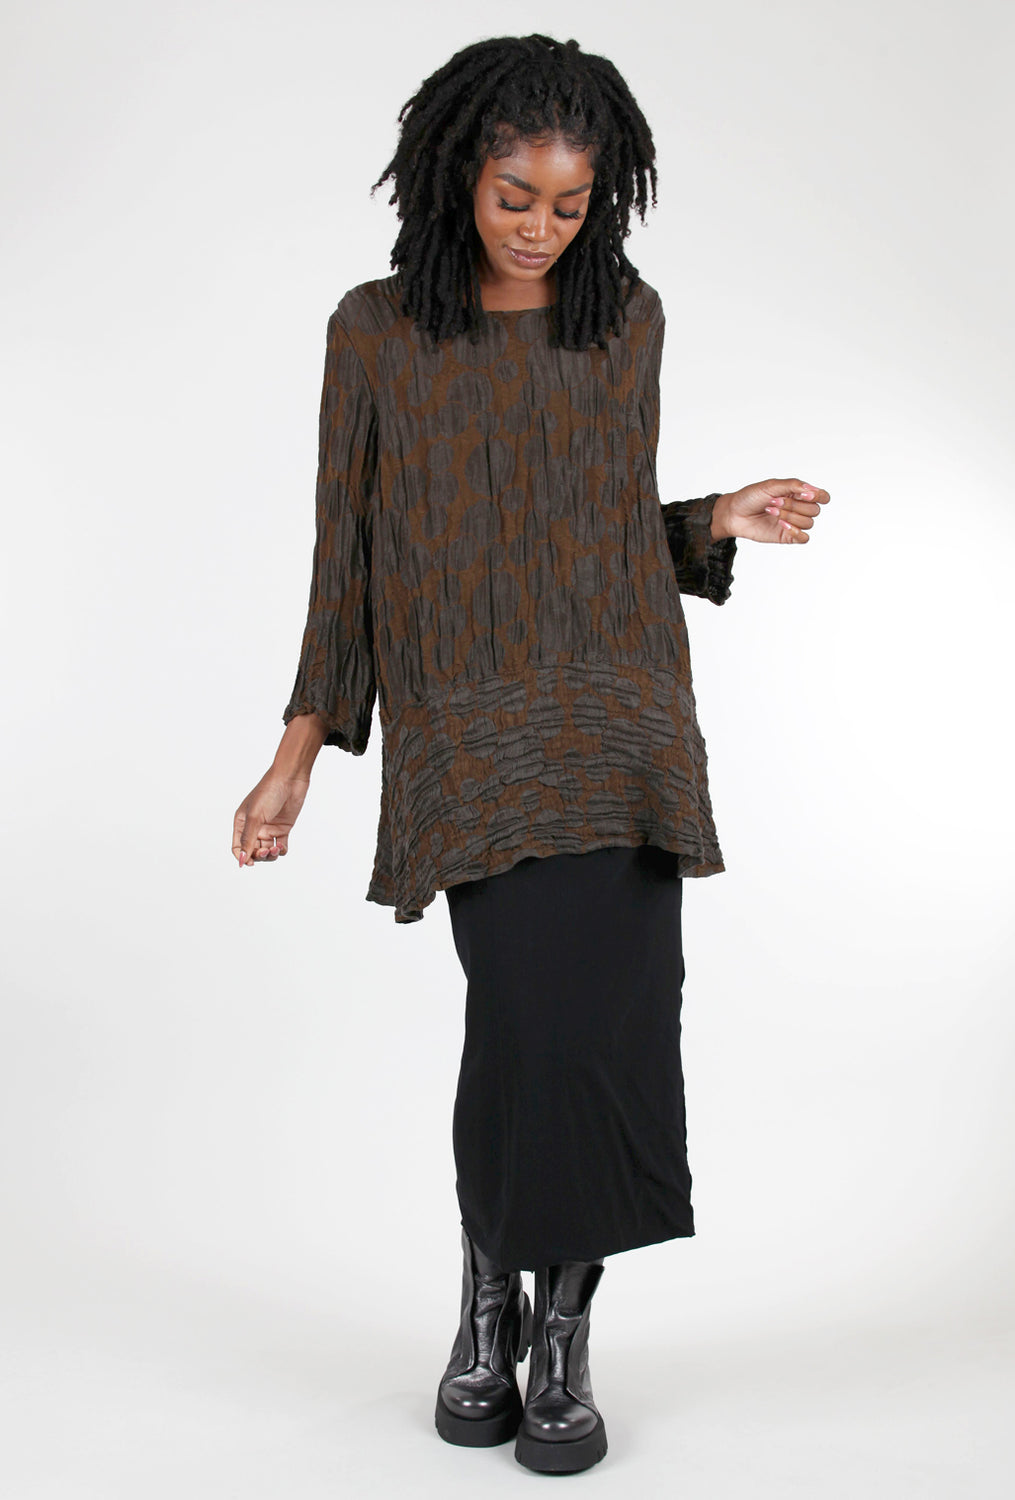 Grizas Shimmer Crinkle Dot Top, Coffee 